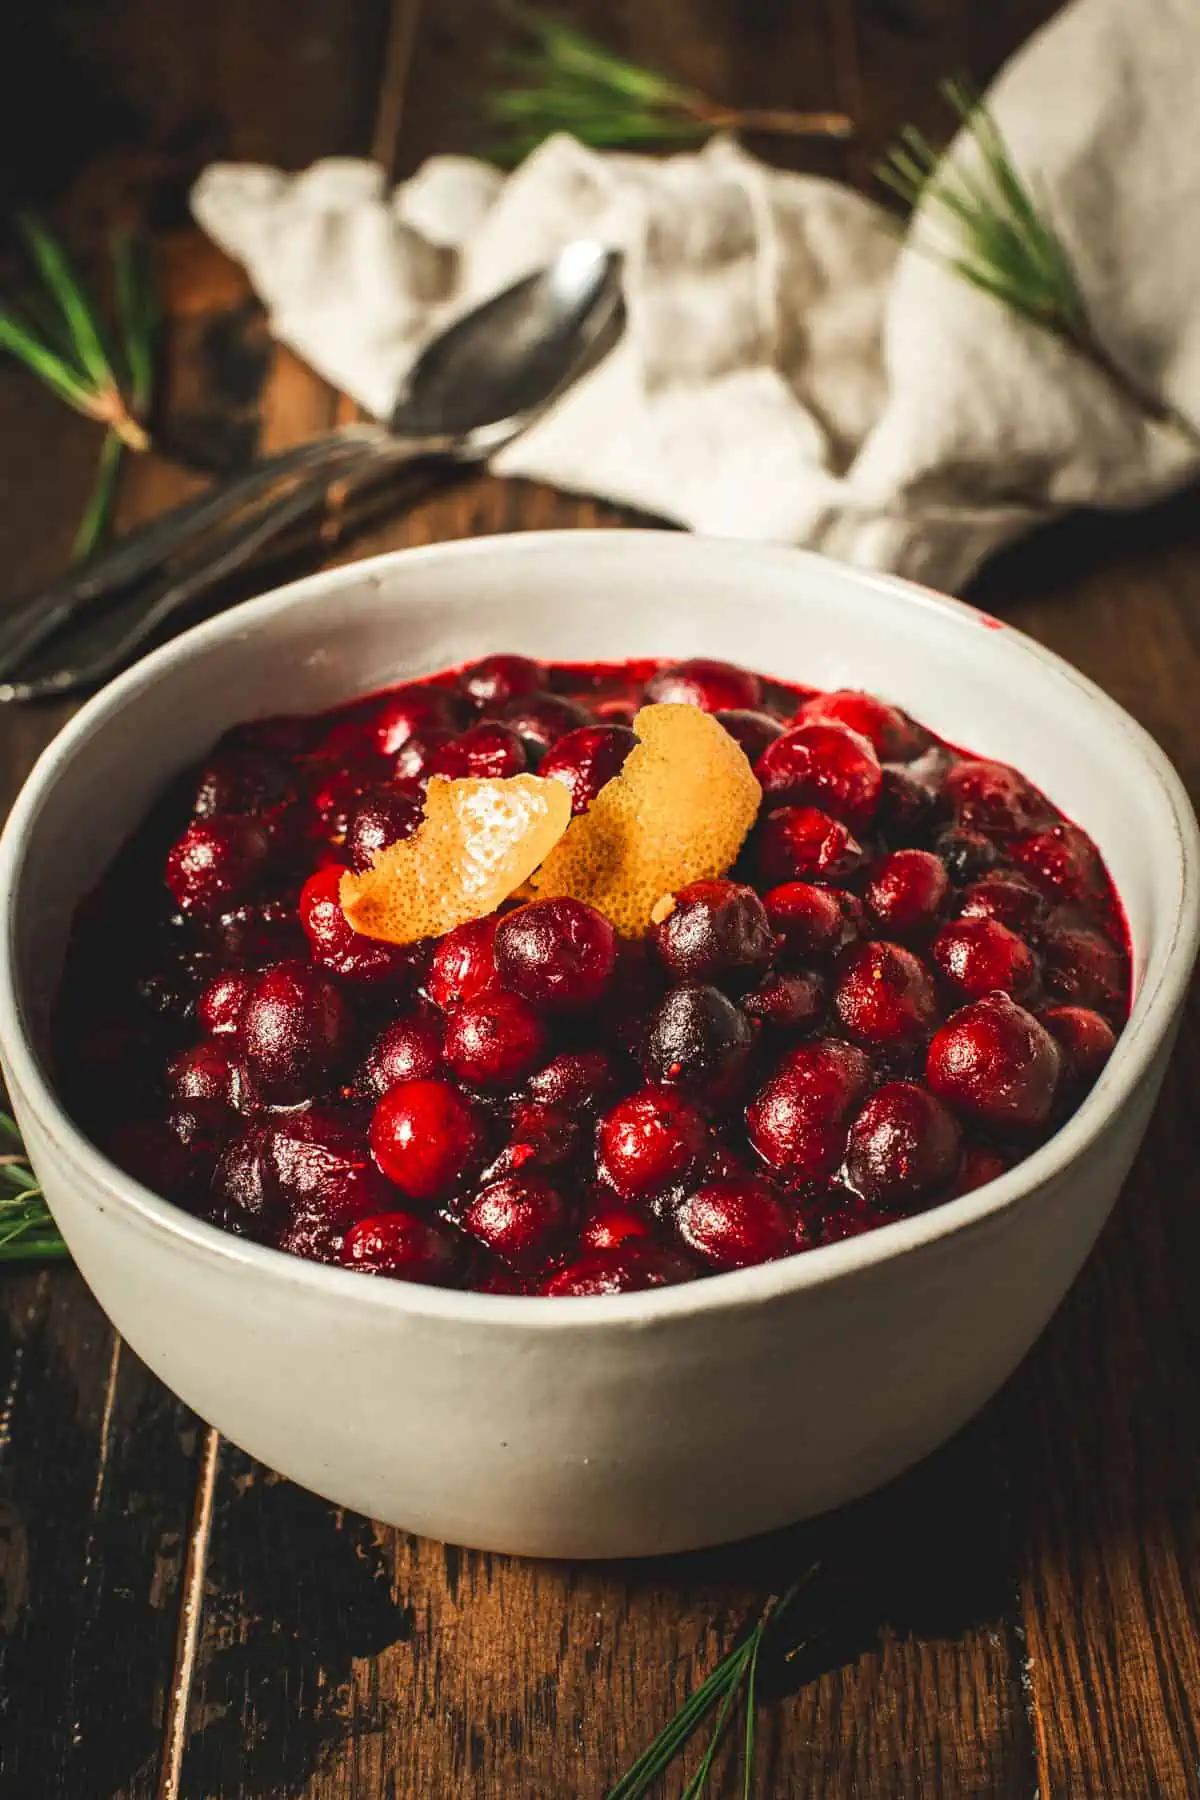 Bourbon cranberry sauce topped with orange peel in a bowl.